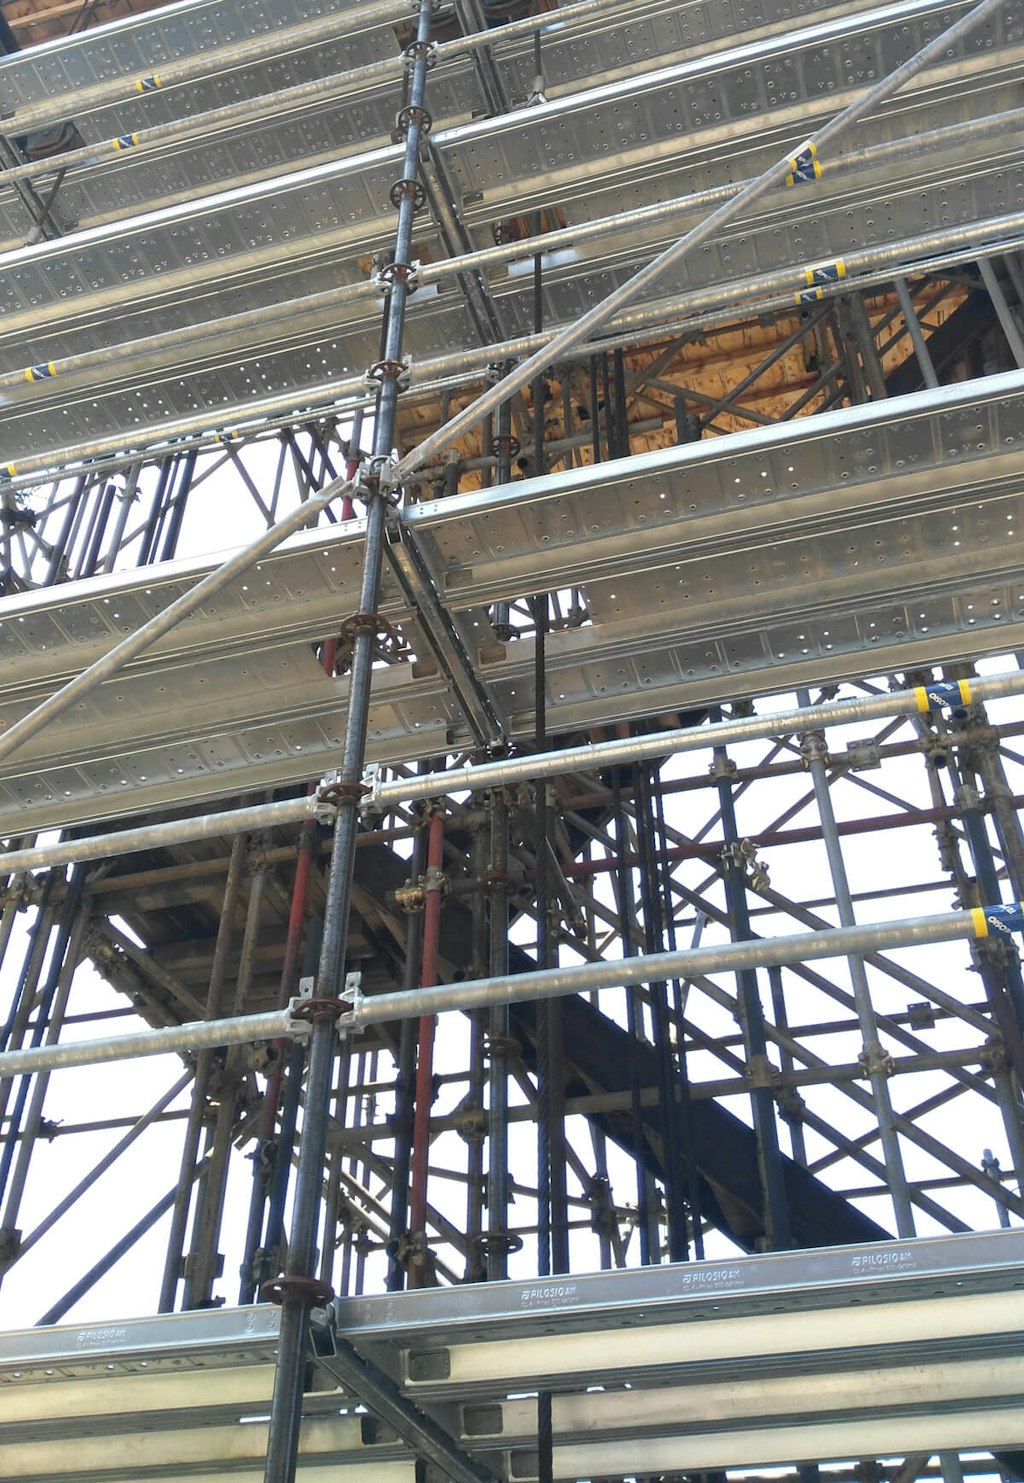 Strong steel wires transmit the pressure from the hydraulic pistons to the top of the scaffolding